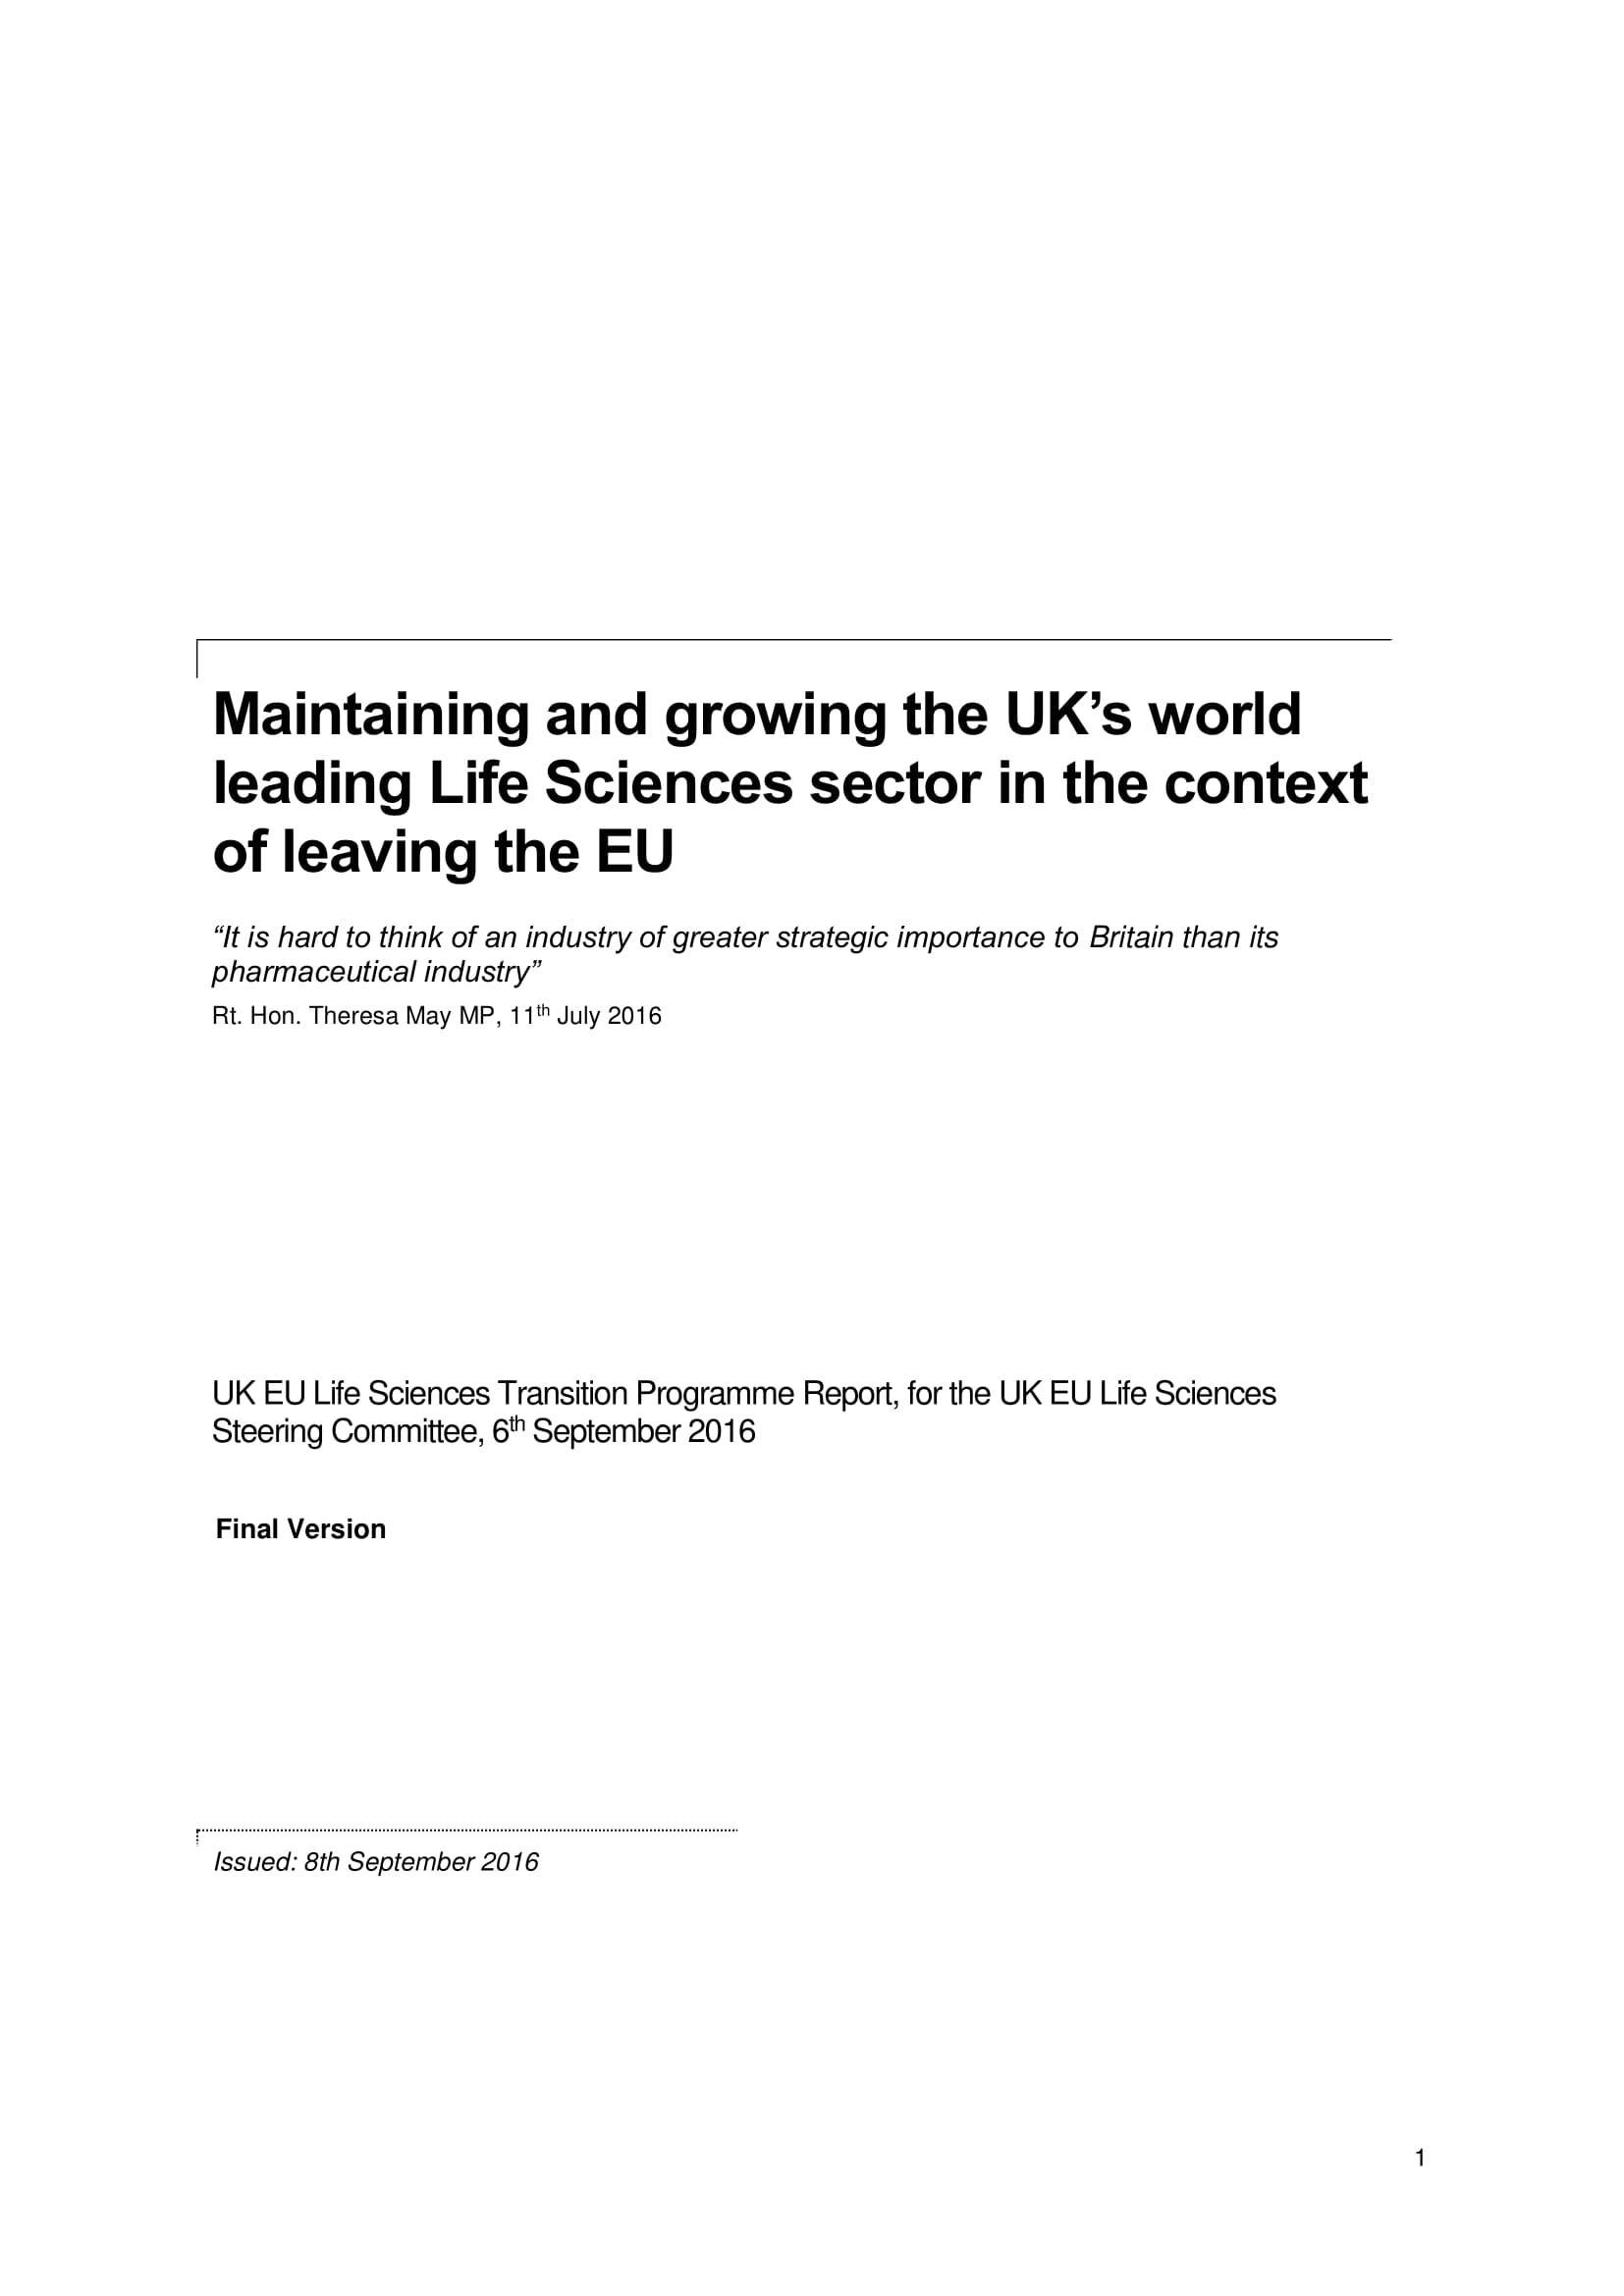 Maintaining and growing the UK’s world leading Life Sciences sector in the context of leaving the EU